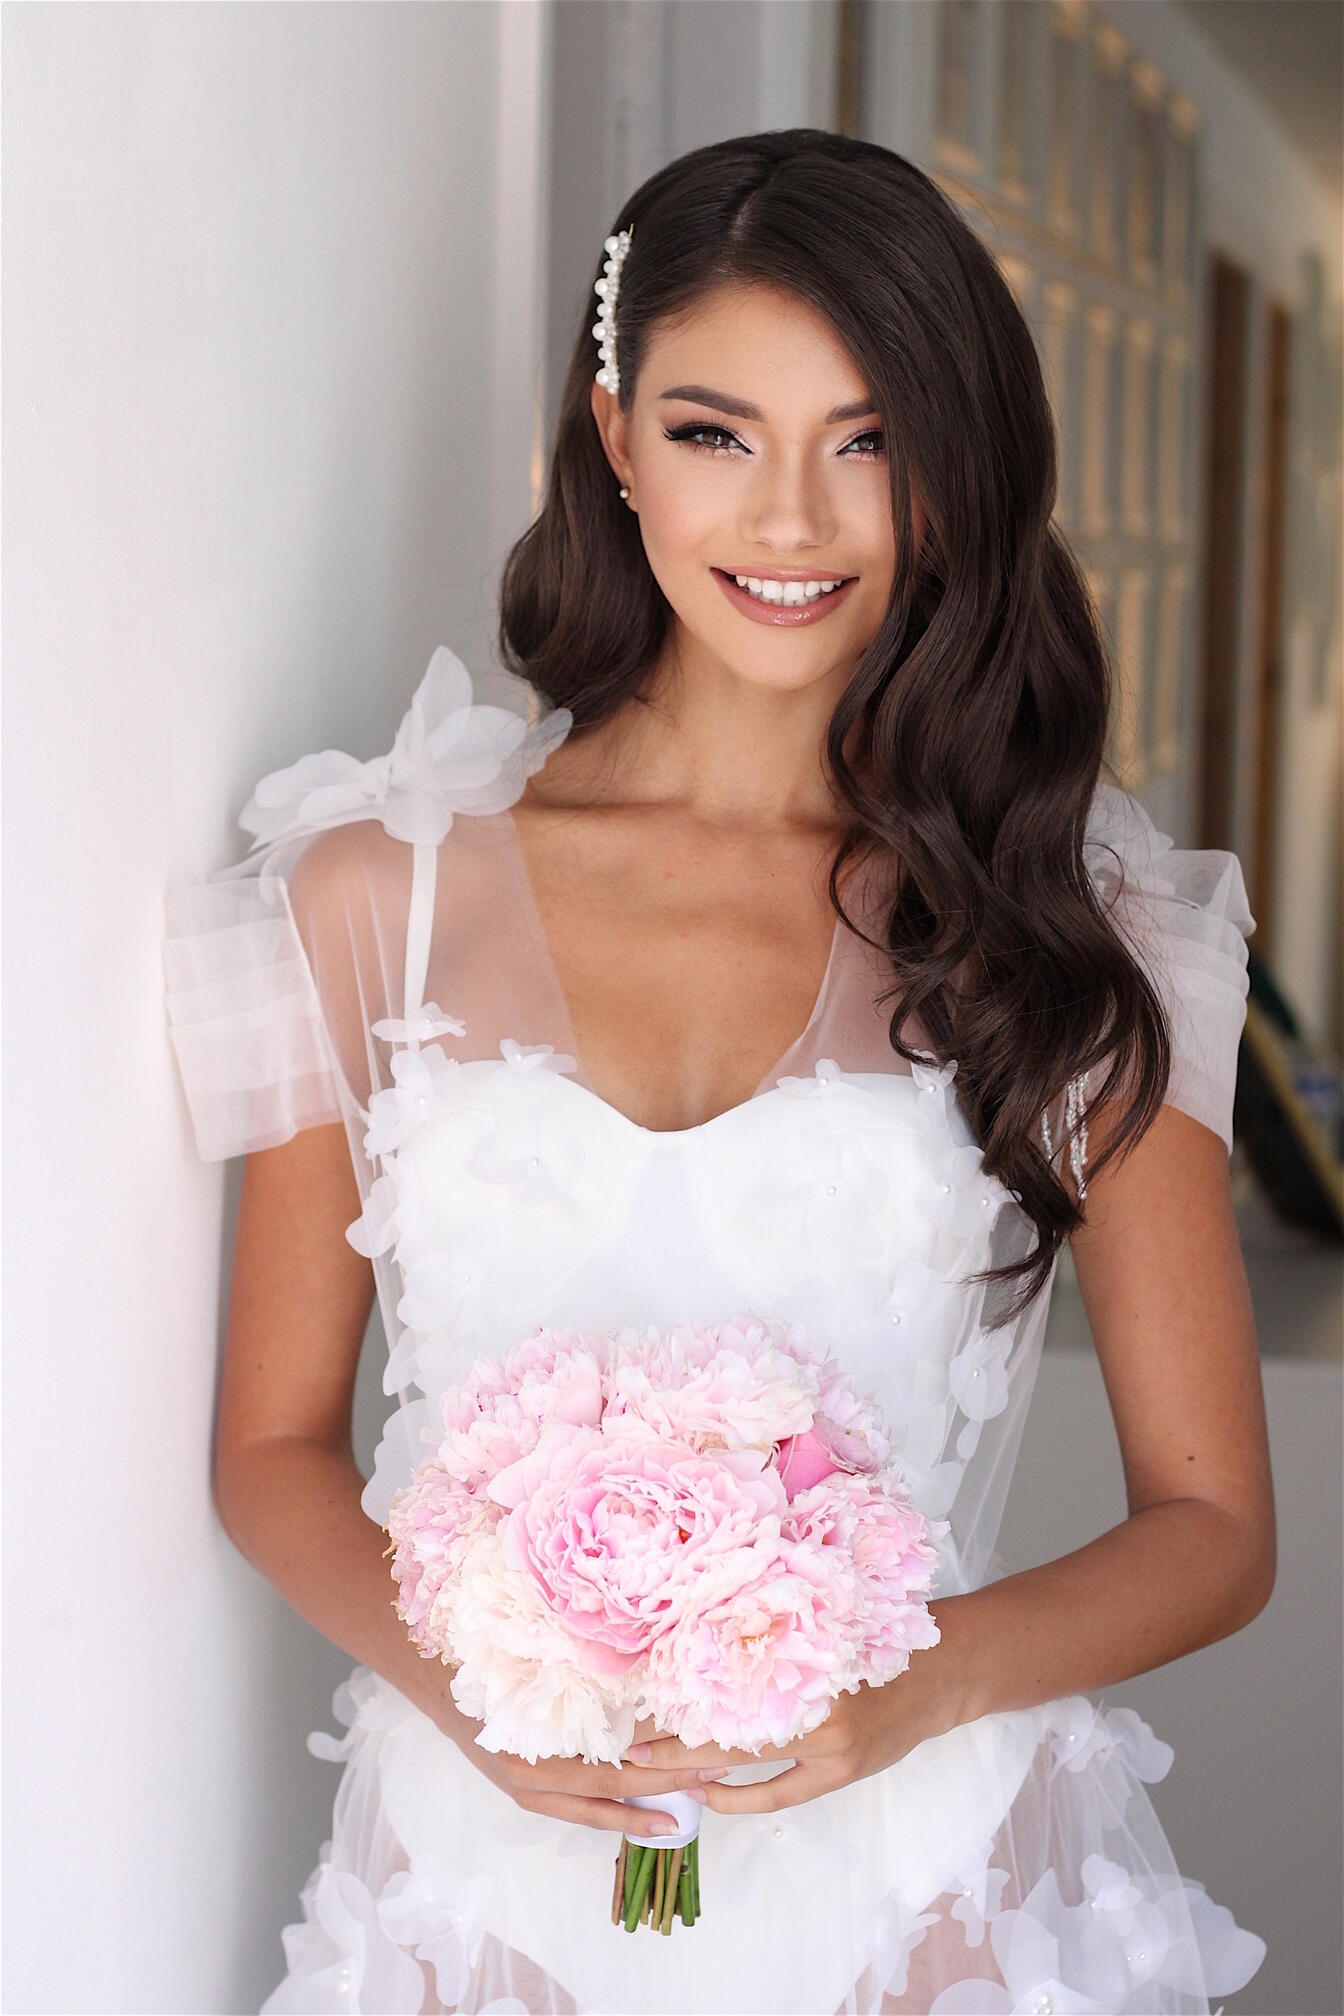 Preview image for post: Elevate Your Bridal Morning with Our Makeup and Hairstyling services